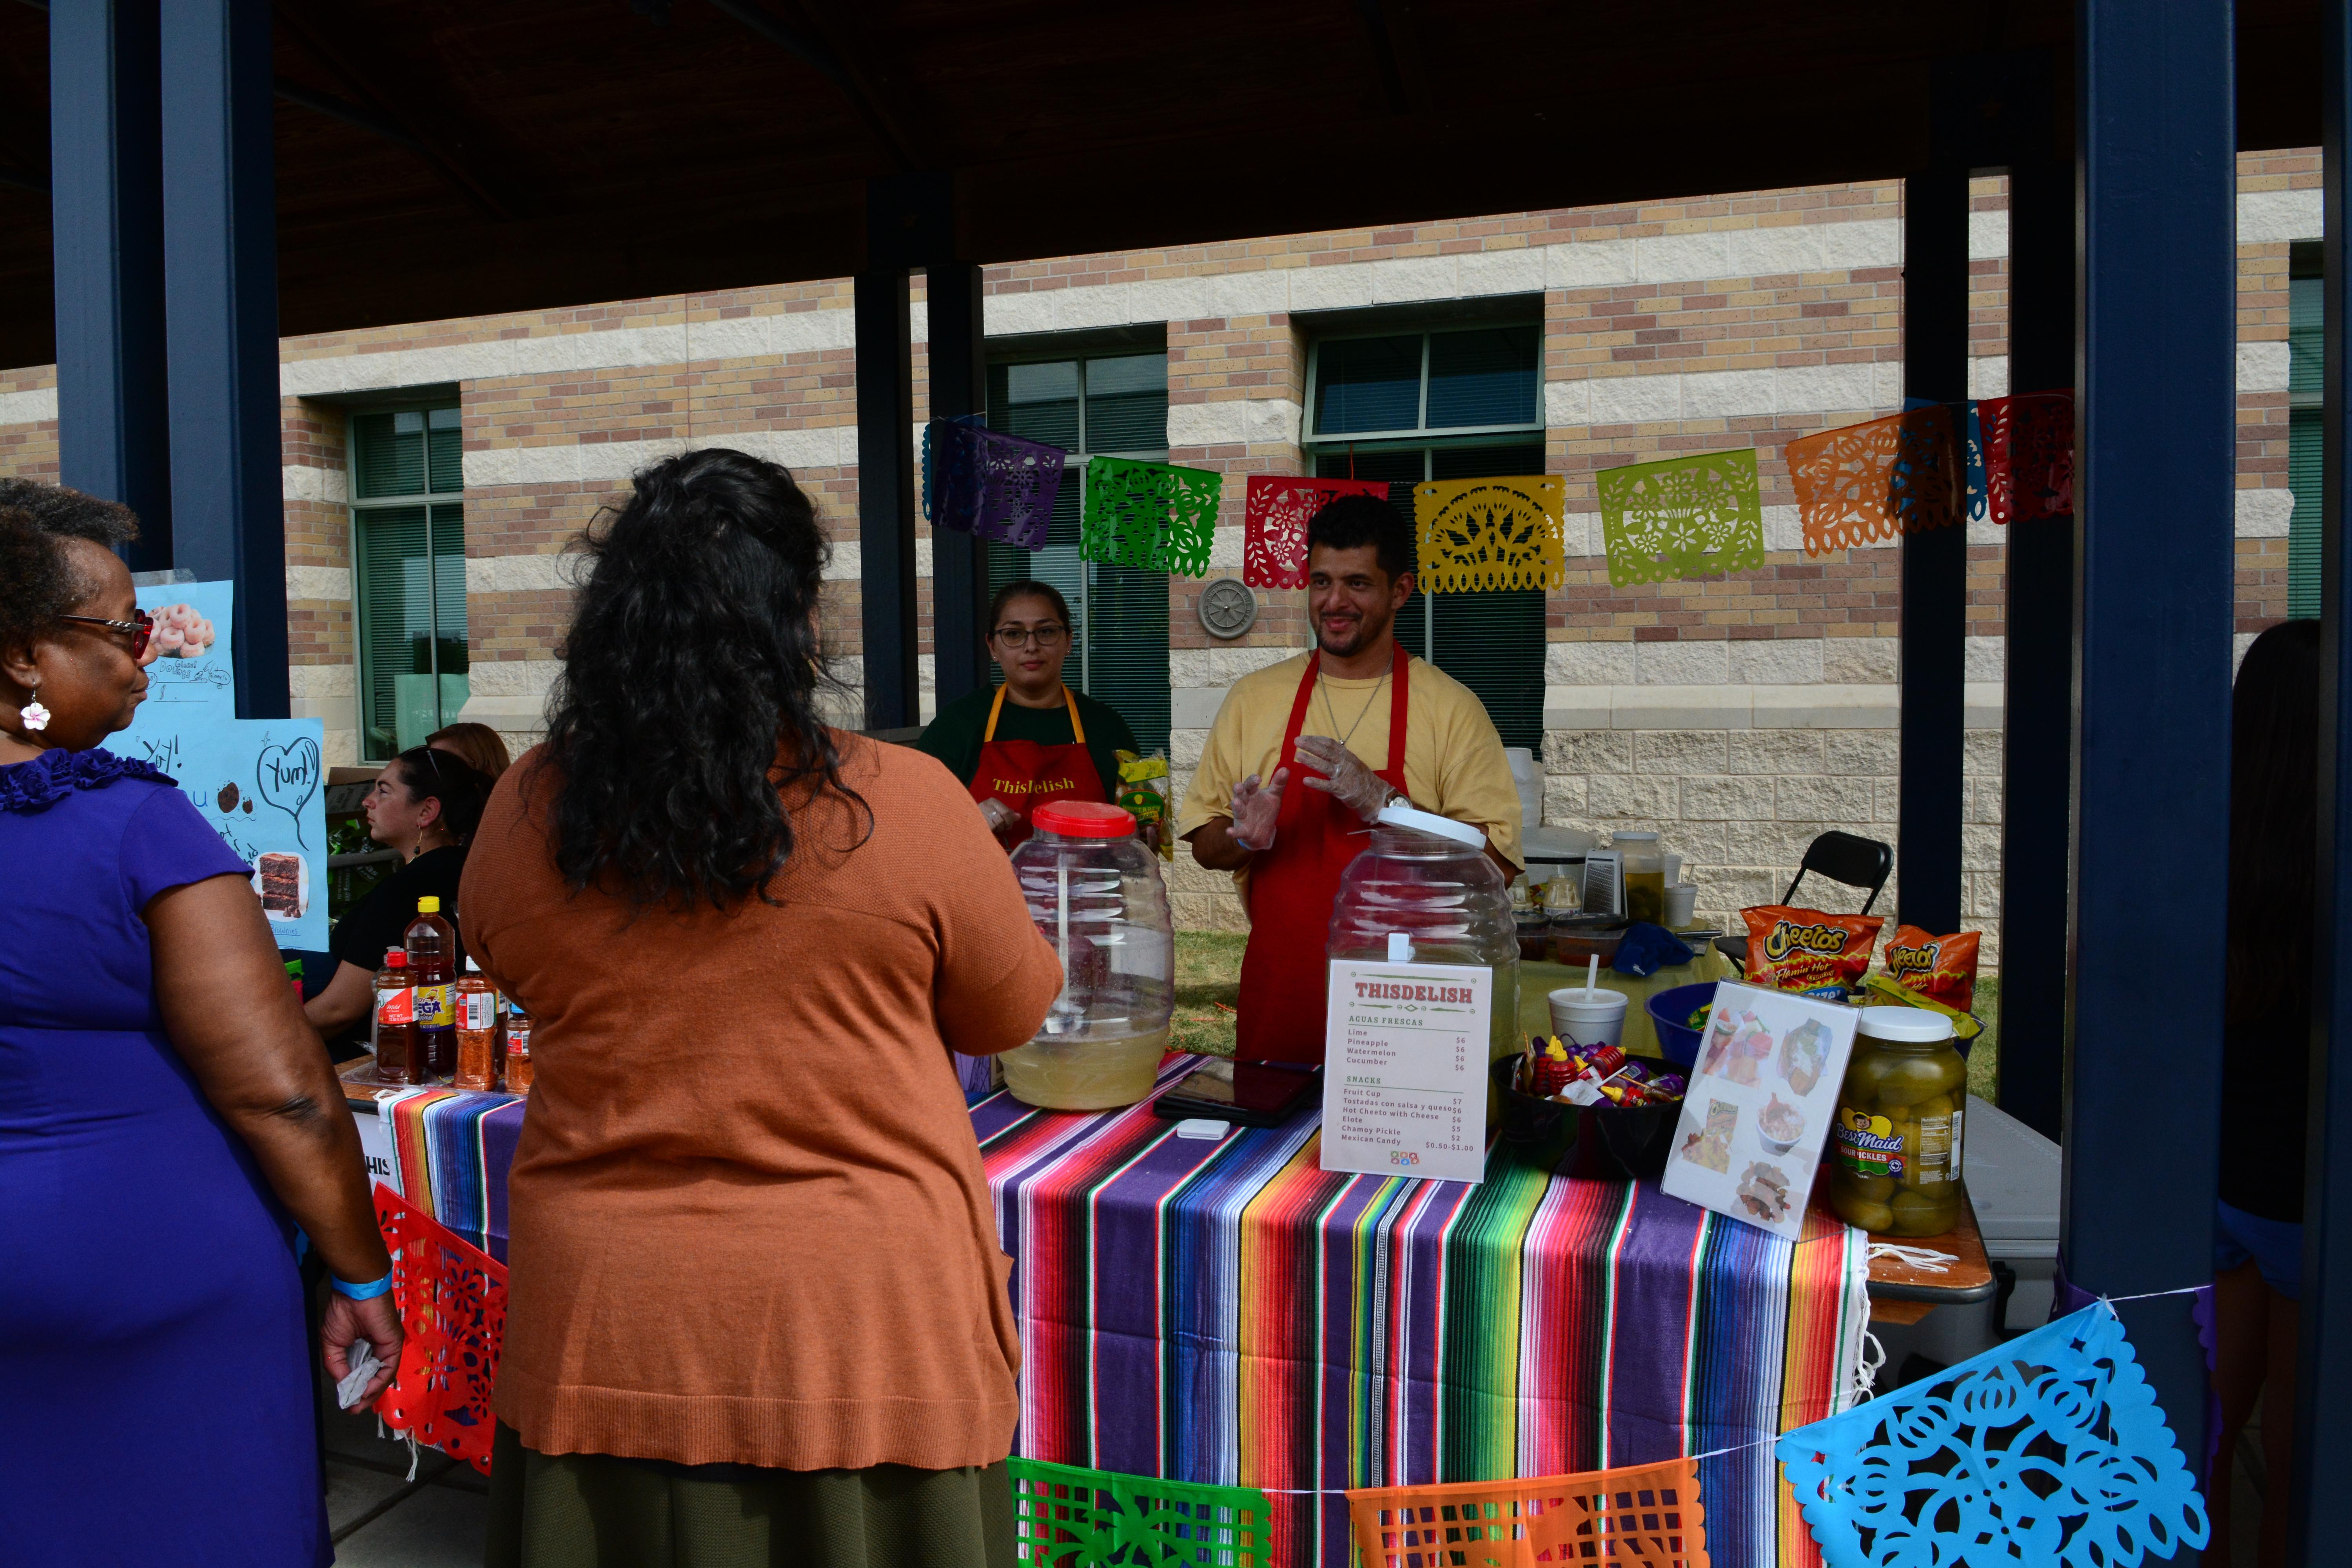 A Homecoming Booth, with a mexican blanket on the table, selling food, two people in red aprons talking with two customers.